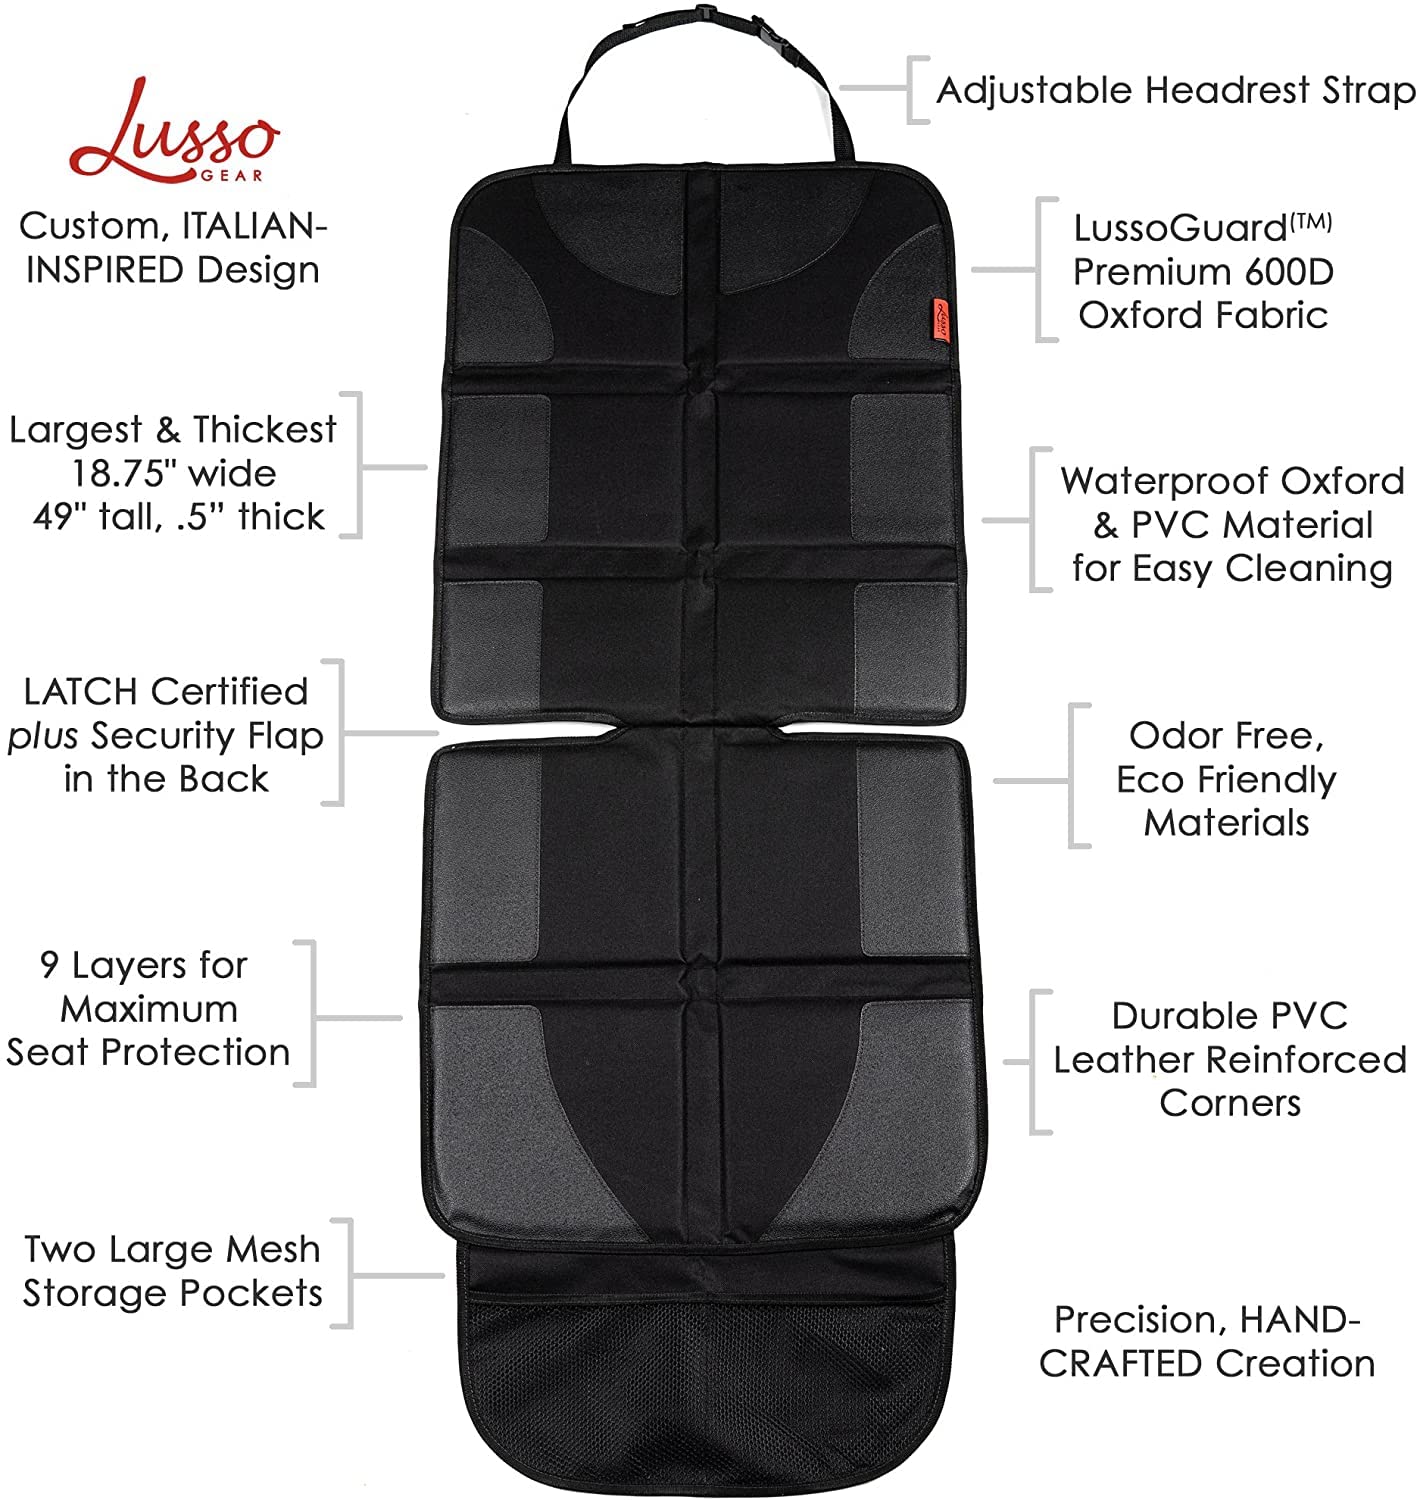 Lusso Gear Two Pack of Car Seat Protector (Black w/Red) + Two Pack of Heavy Duty Kick Mats (Black w/Red), Waterproof, Protects Fabric or Leather Seats, Premium Oxford Fabric, Travel Essentials